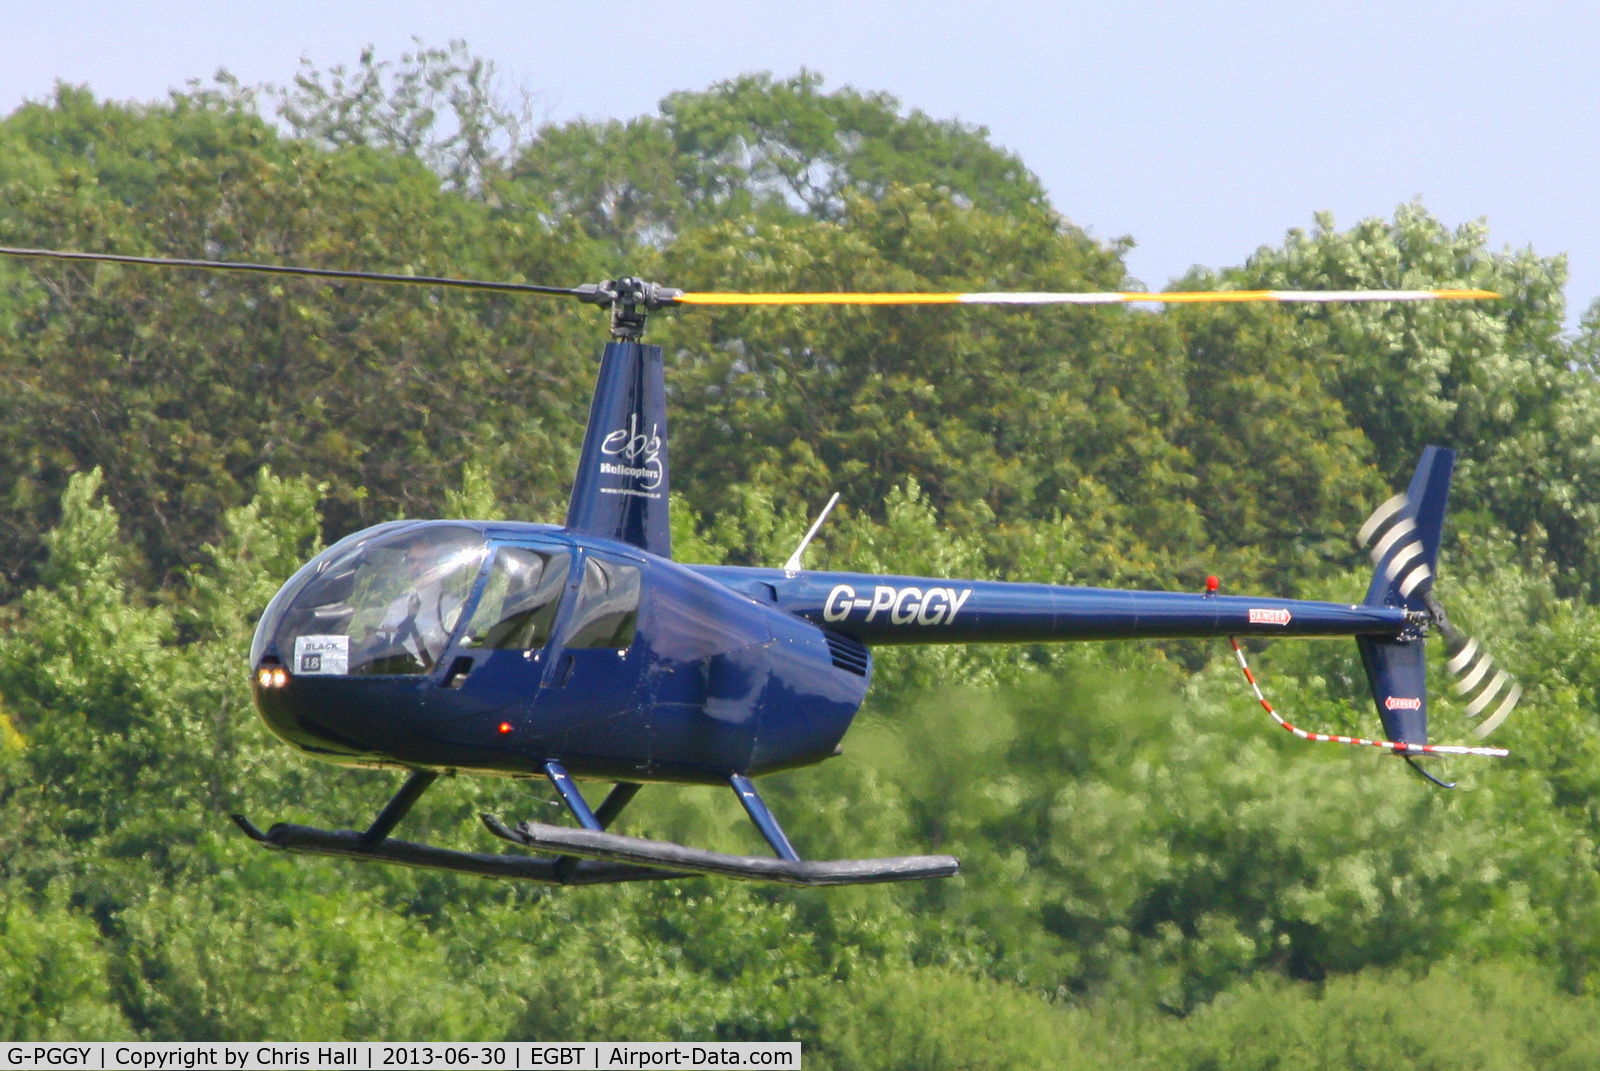 G-PGGY, 2006 Robinson R44 Clipper II C/N 11115, being used for ferrying race fans to the British F1 Grand Prix at Silverstone